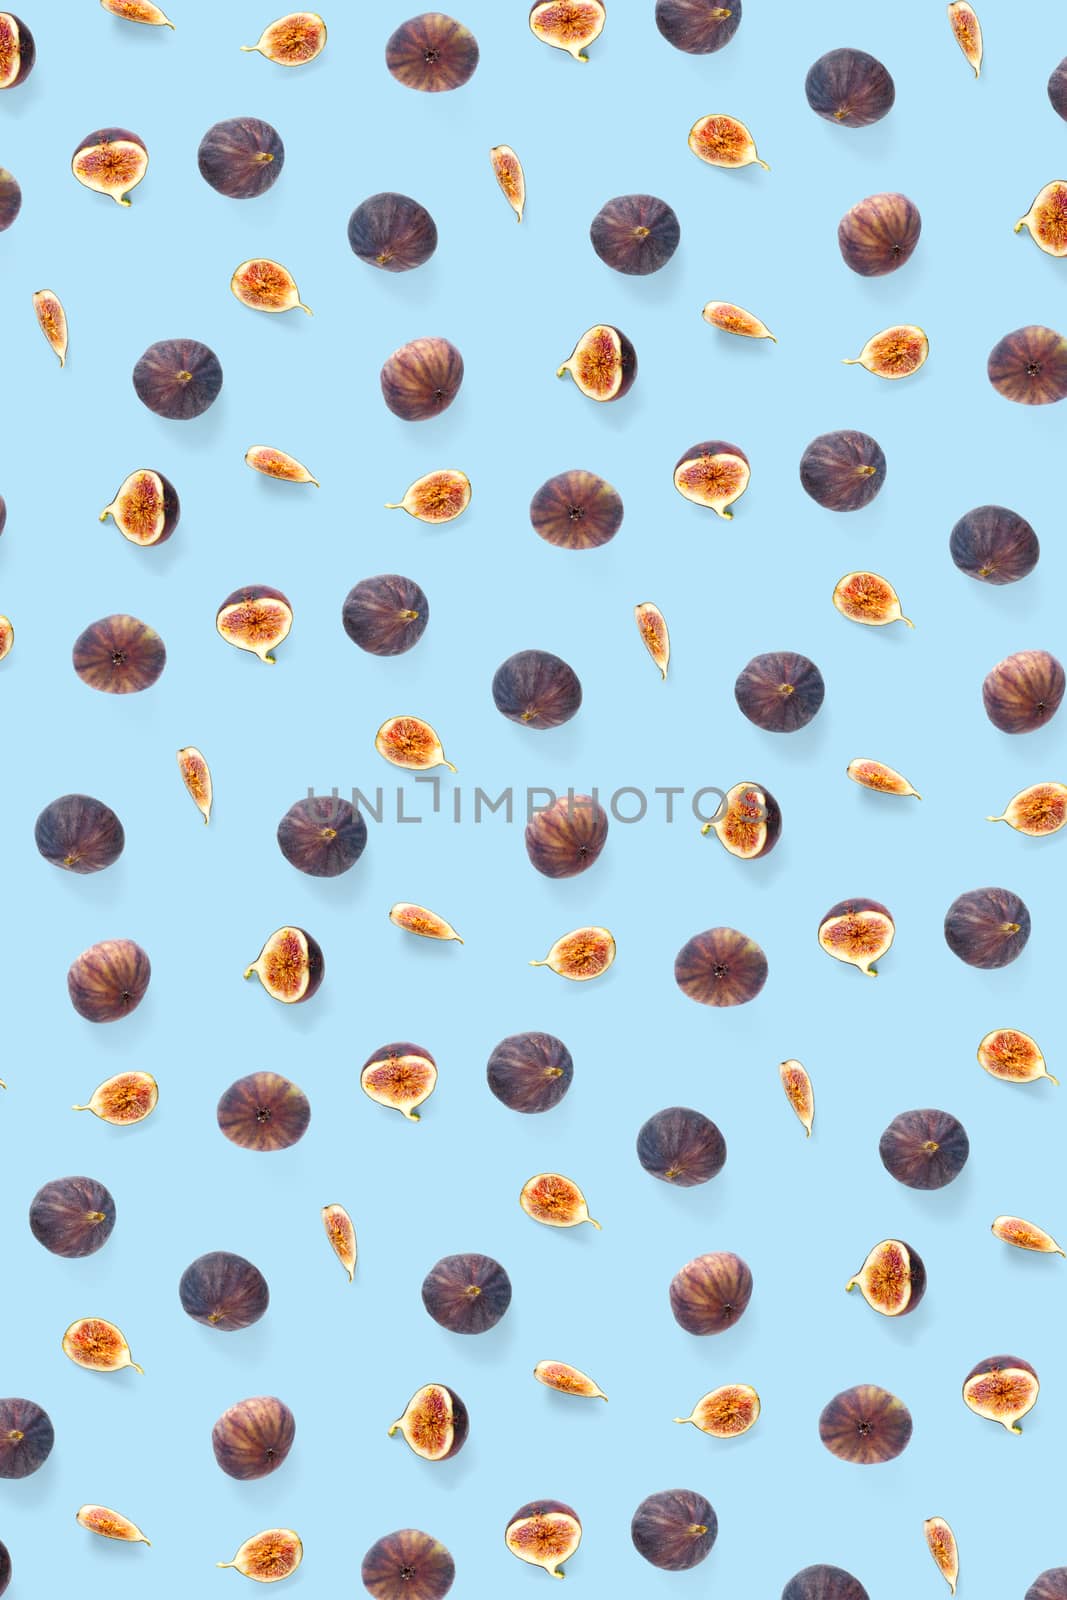 Background from Fresh figs. Food Photo. Modern fig fruits background. Creative set of the whole and sliced figs on a blue background, not pattern